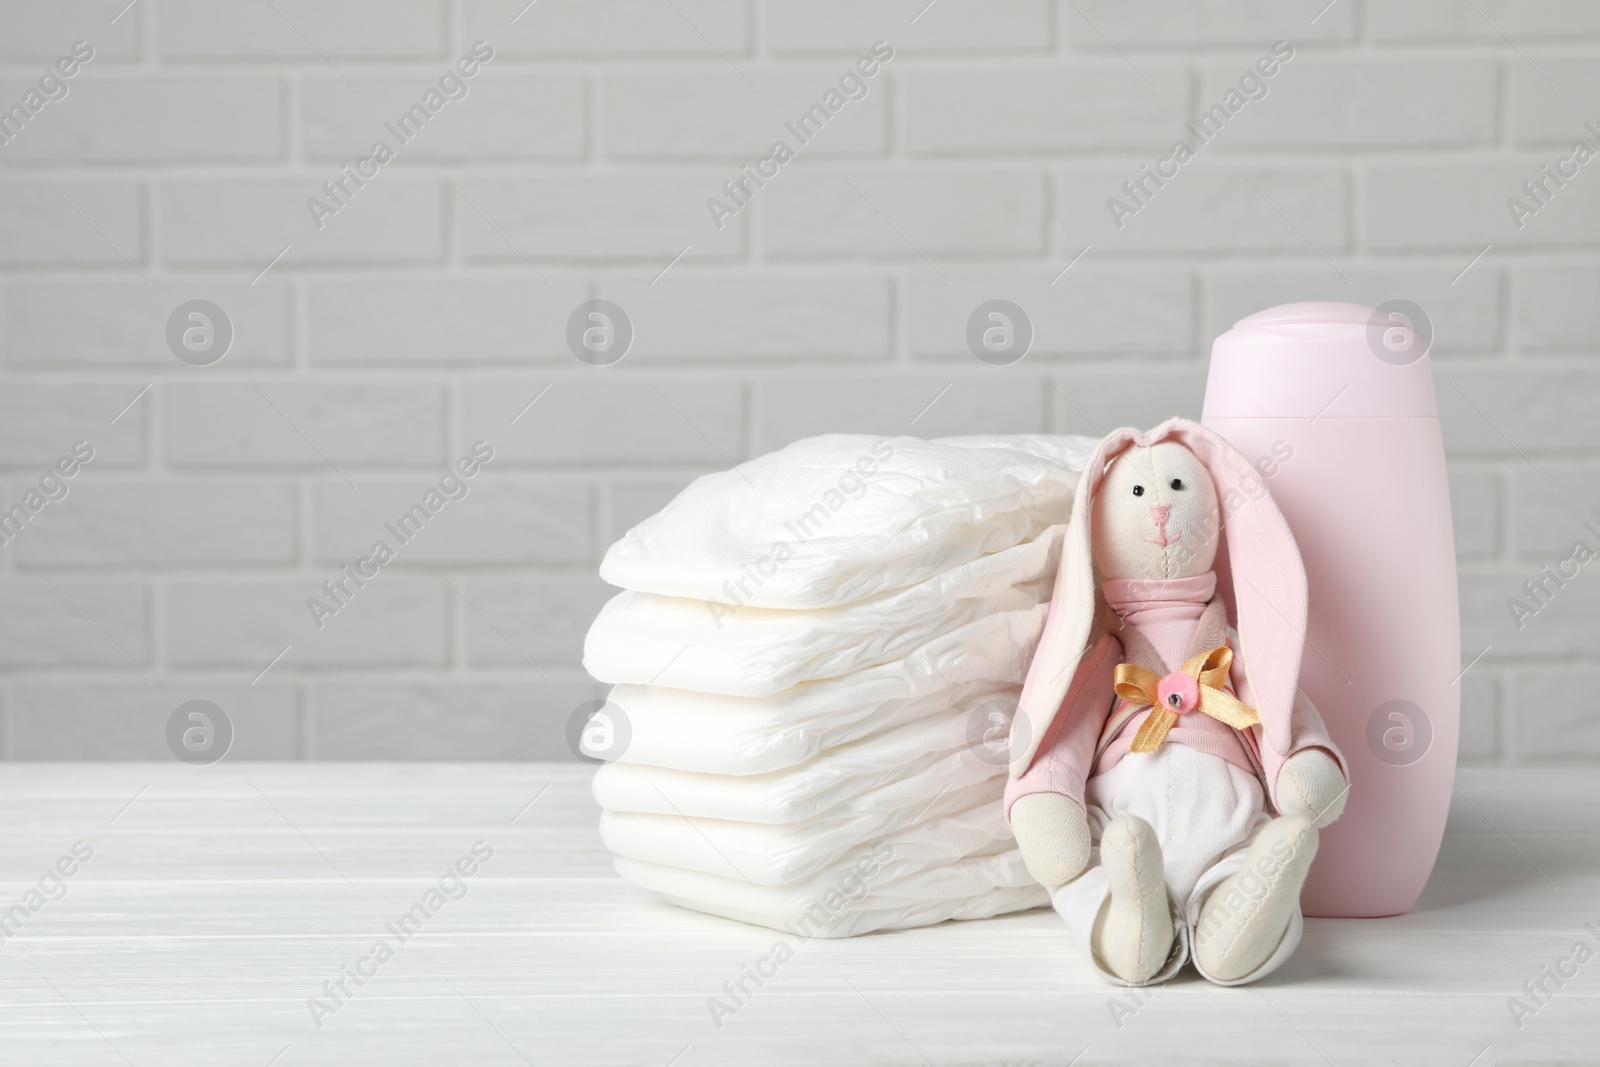 Photo of Baby diapers, toy bunny and bottle on wooden table against white brick wall. Space for text